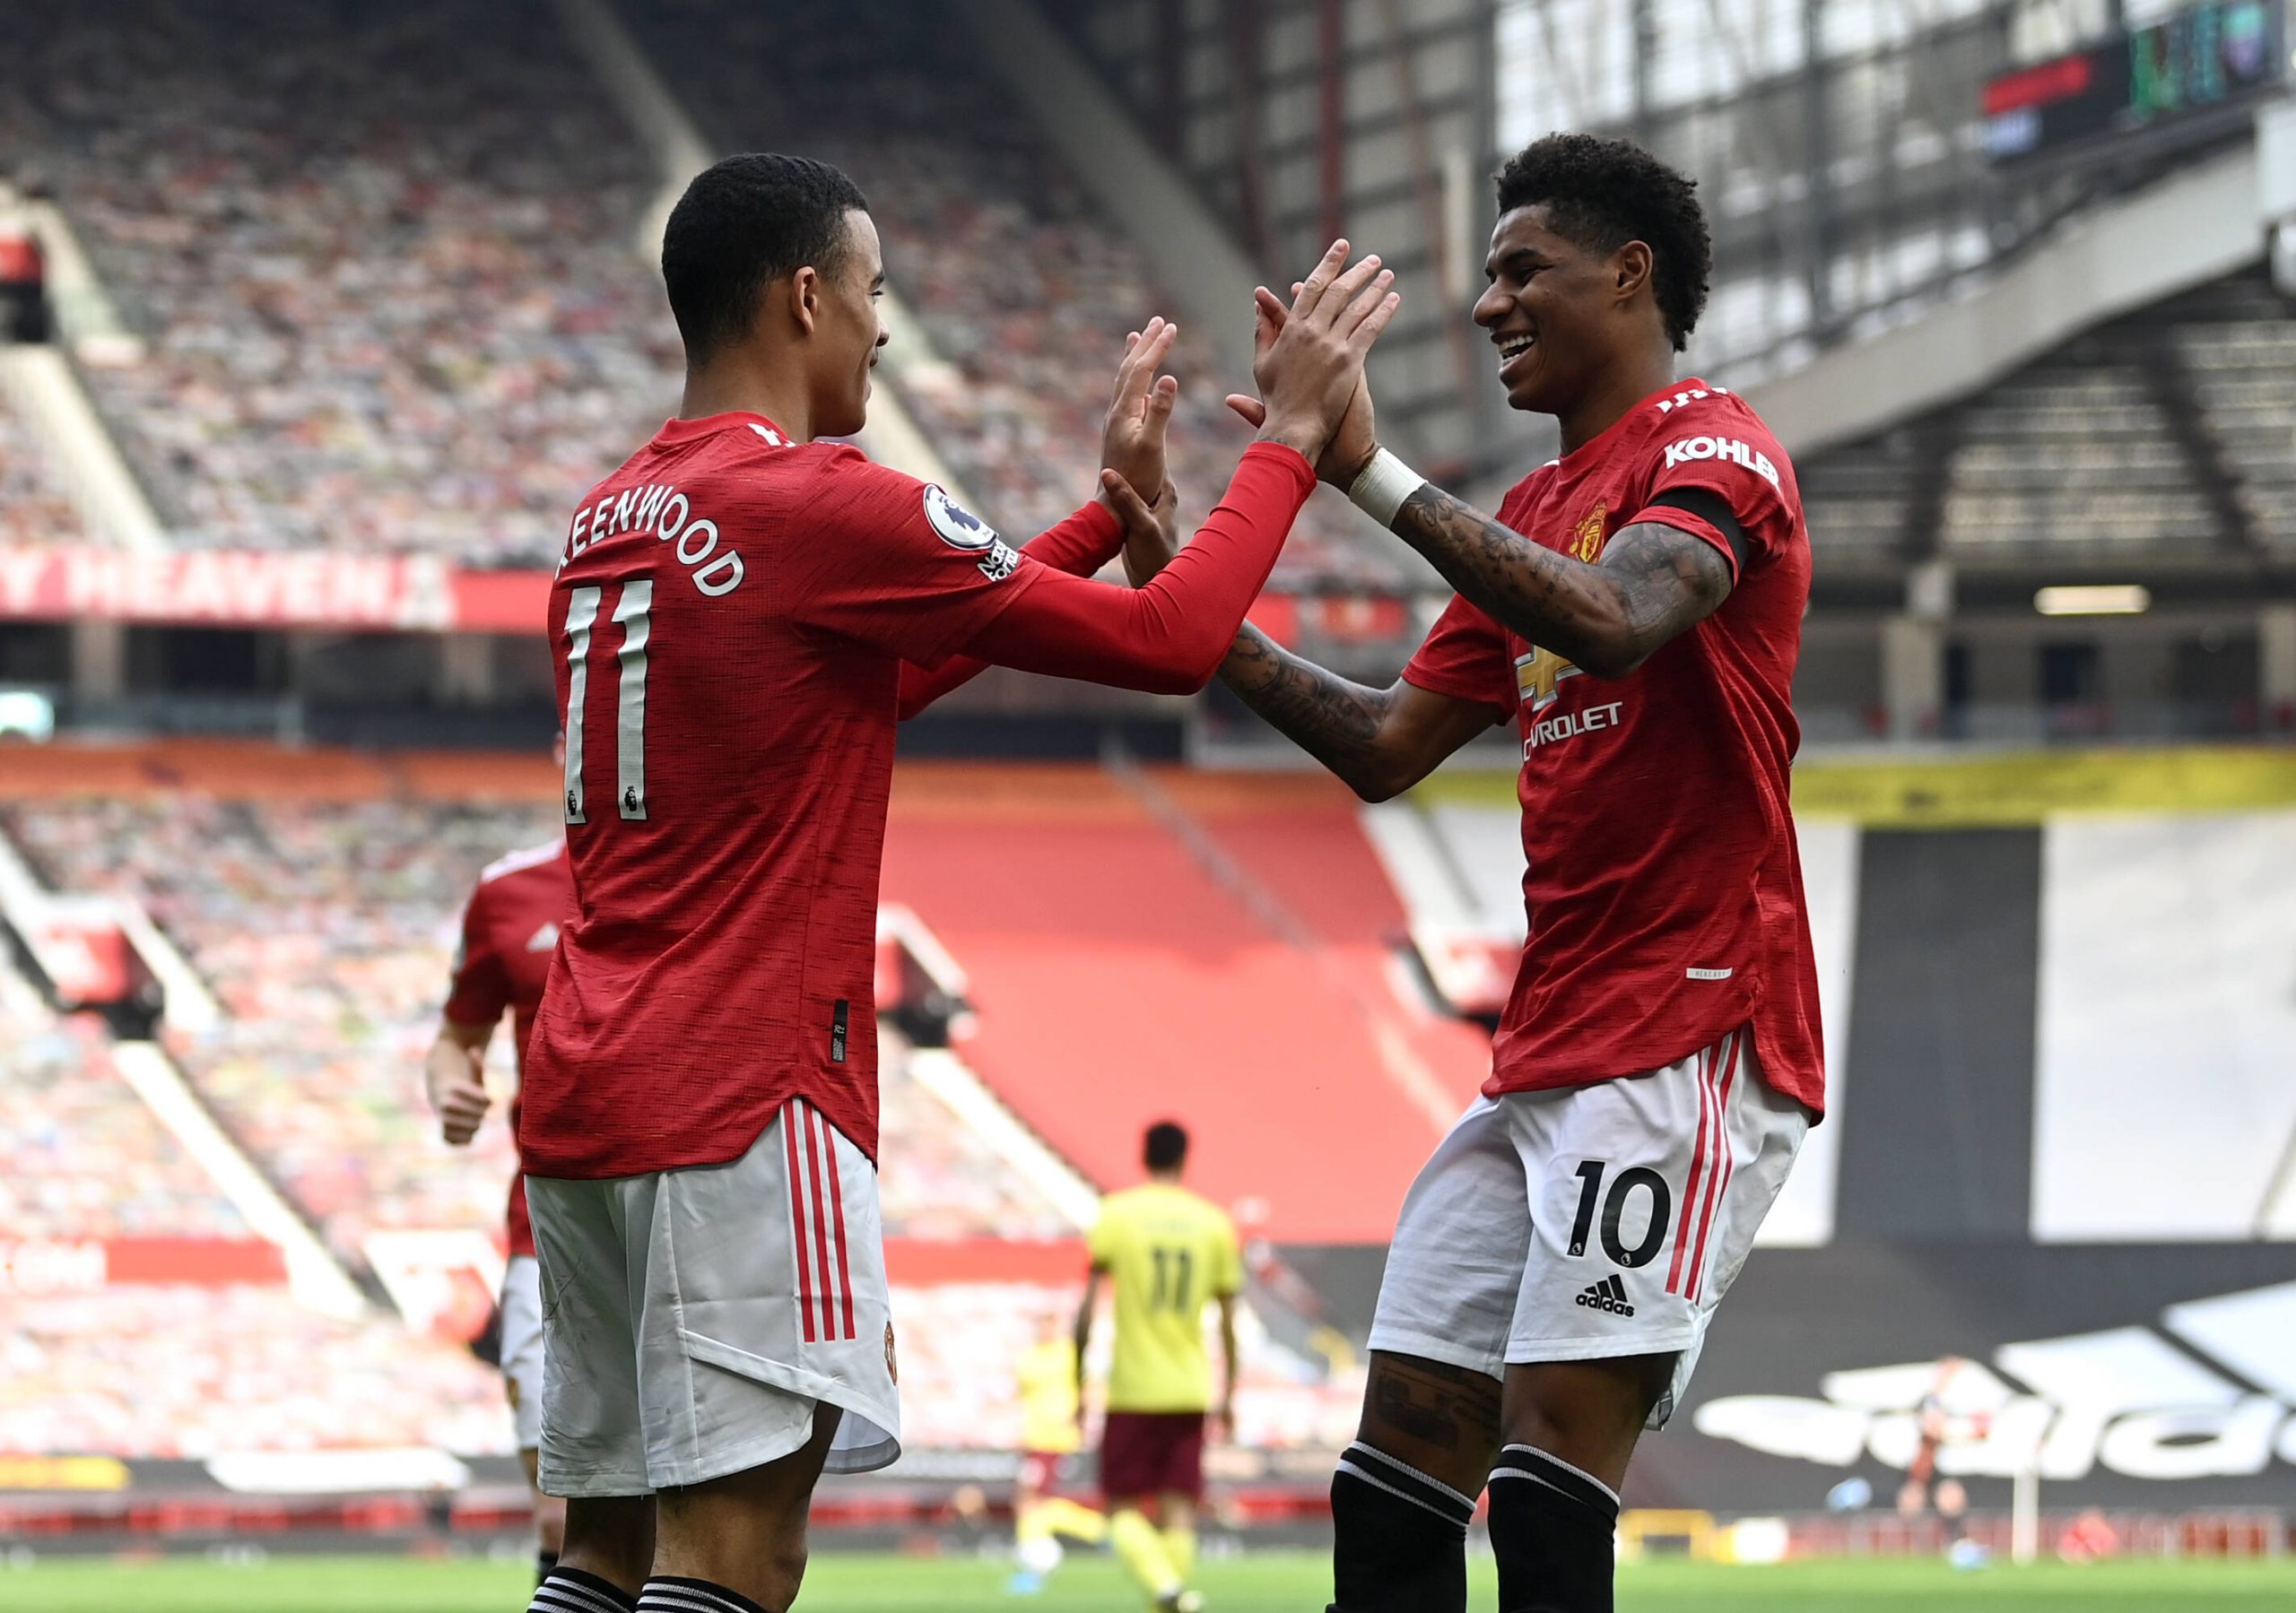 Marcus Rashford and Mason Greenwood are two of the brightest products of Manchester United's youth set-up in recent years.